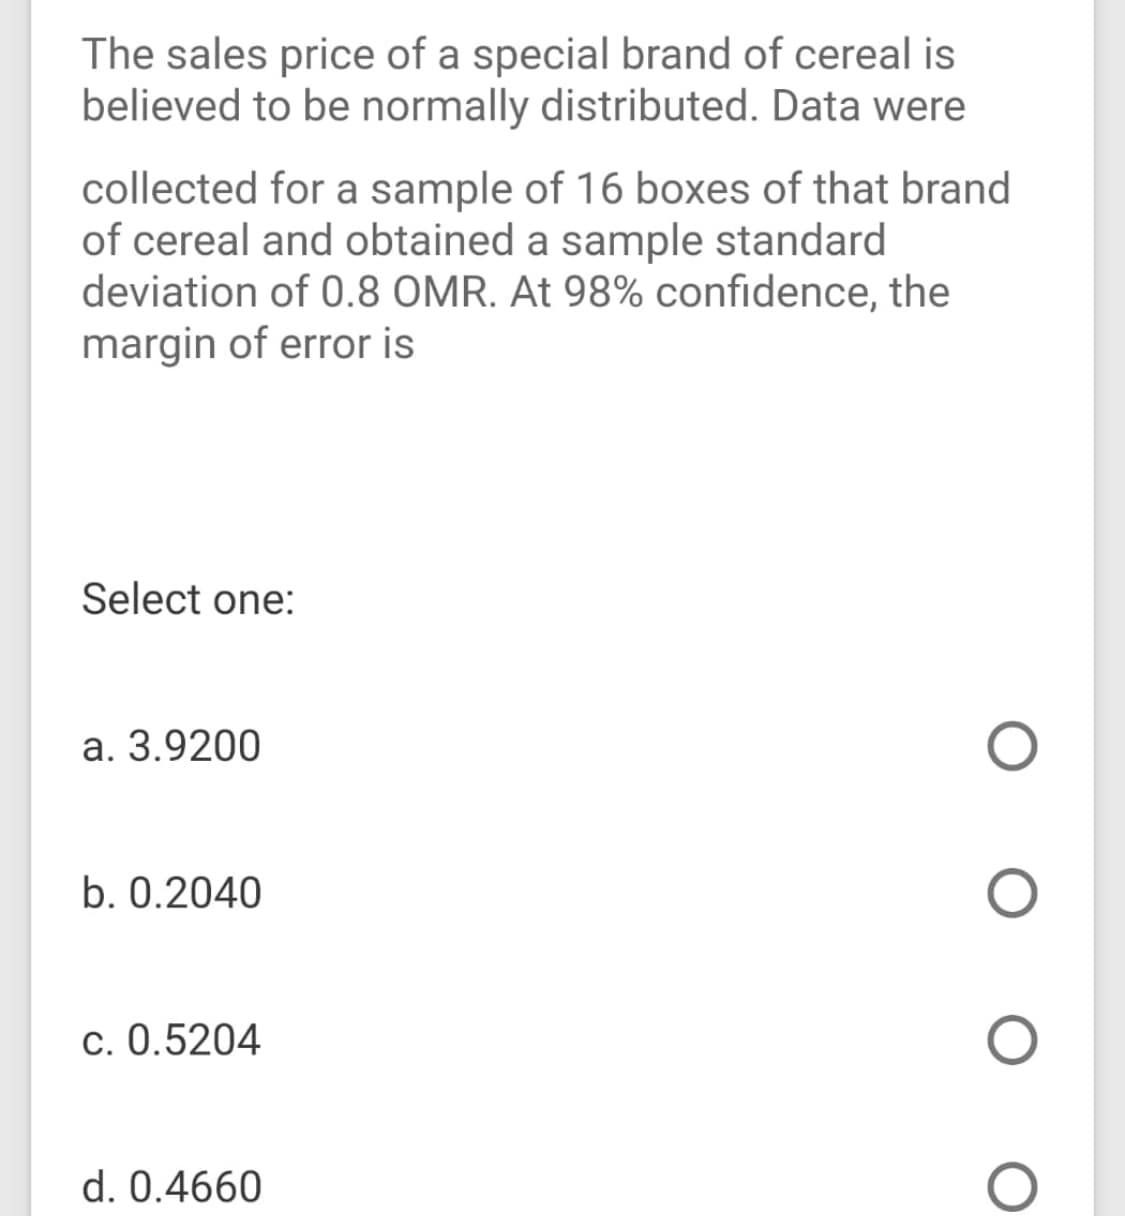 The sales price of a special brand of cereal is
believed to be normally distributed. Data were
collected for a sample of 16 boxes of that brand
of cereal and obtained a sample standard
deviation of 0.8 OMR. At 98% confidence, the
margin of error is
